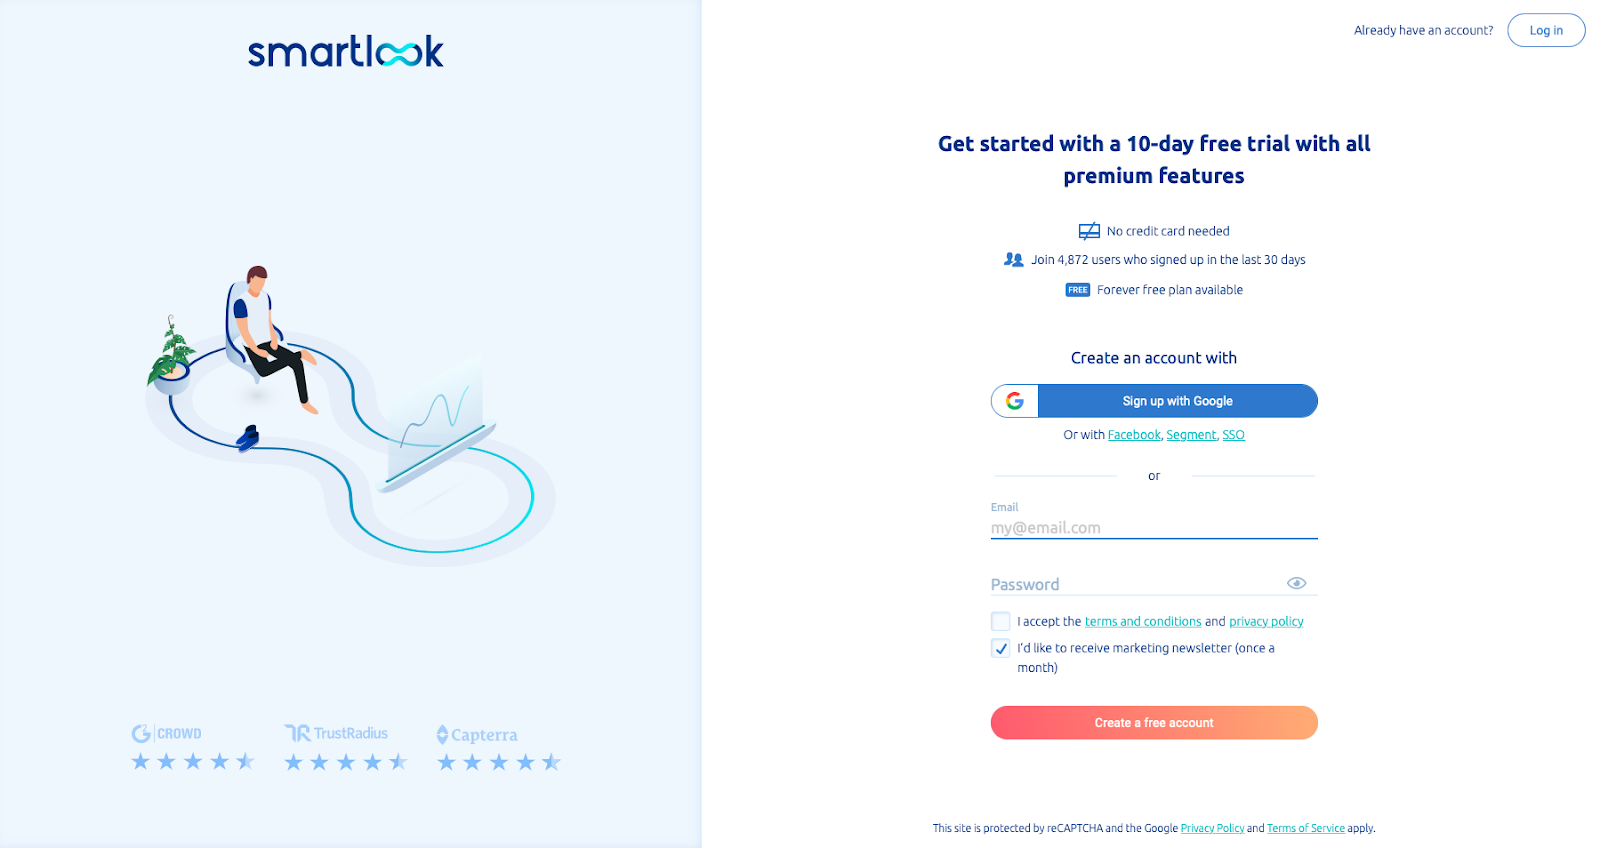 Smartlook's free trial Landing Page